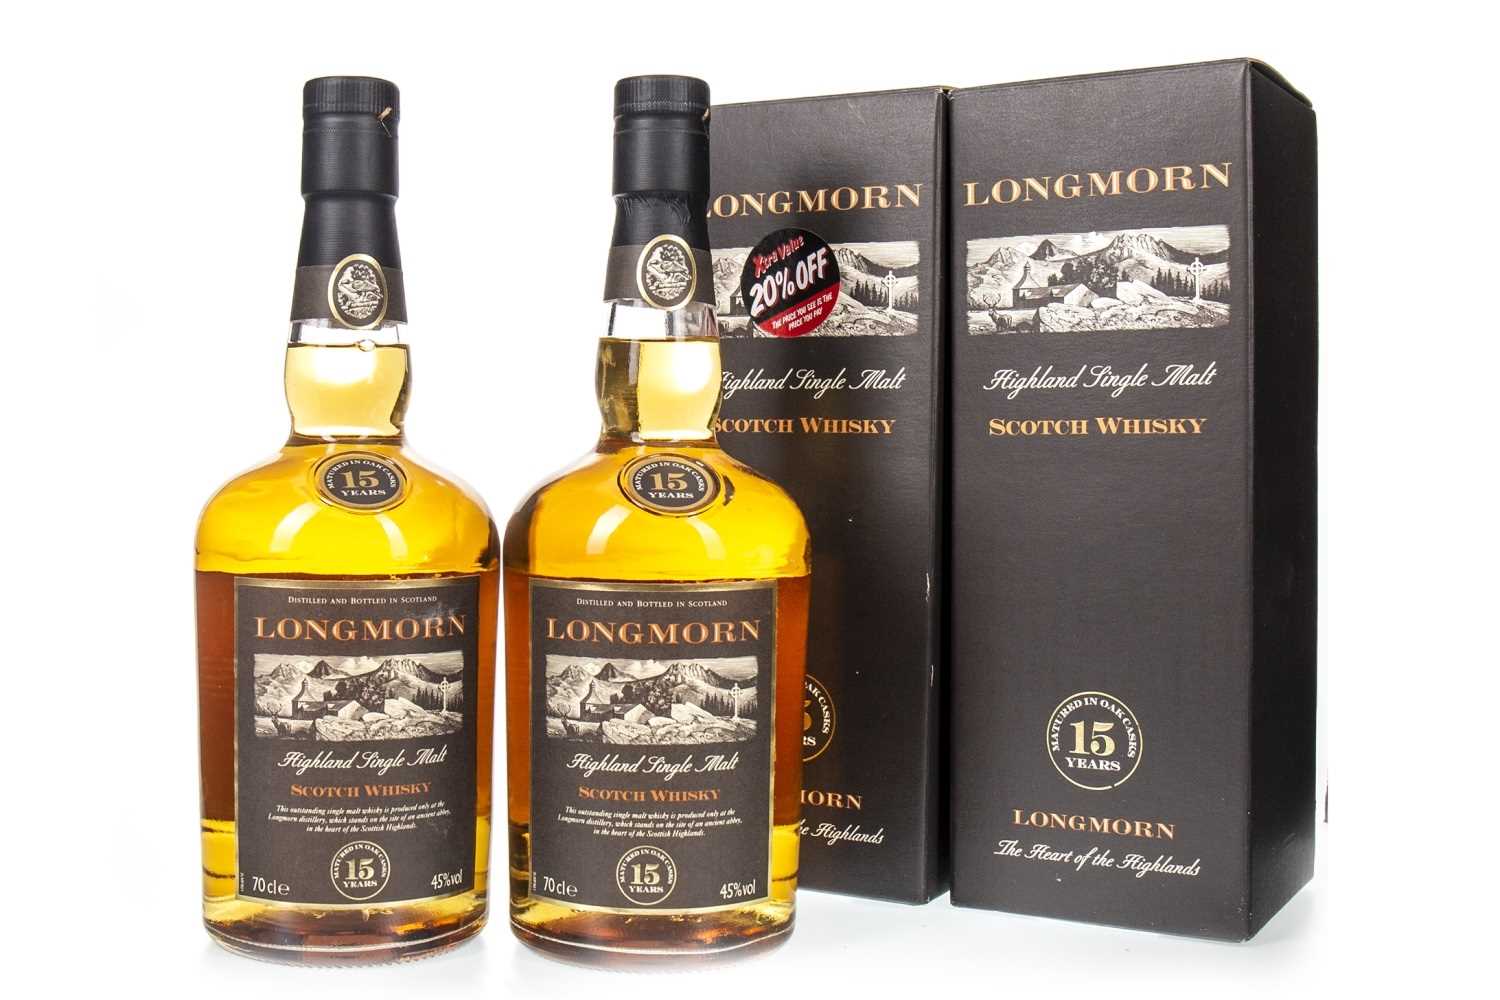 Lot 114 - TWO BOTTLES OF LONGMORN AGED 15 YEARS